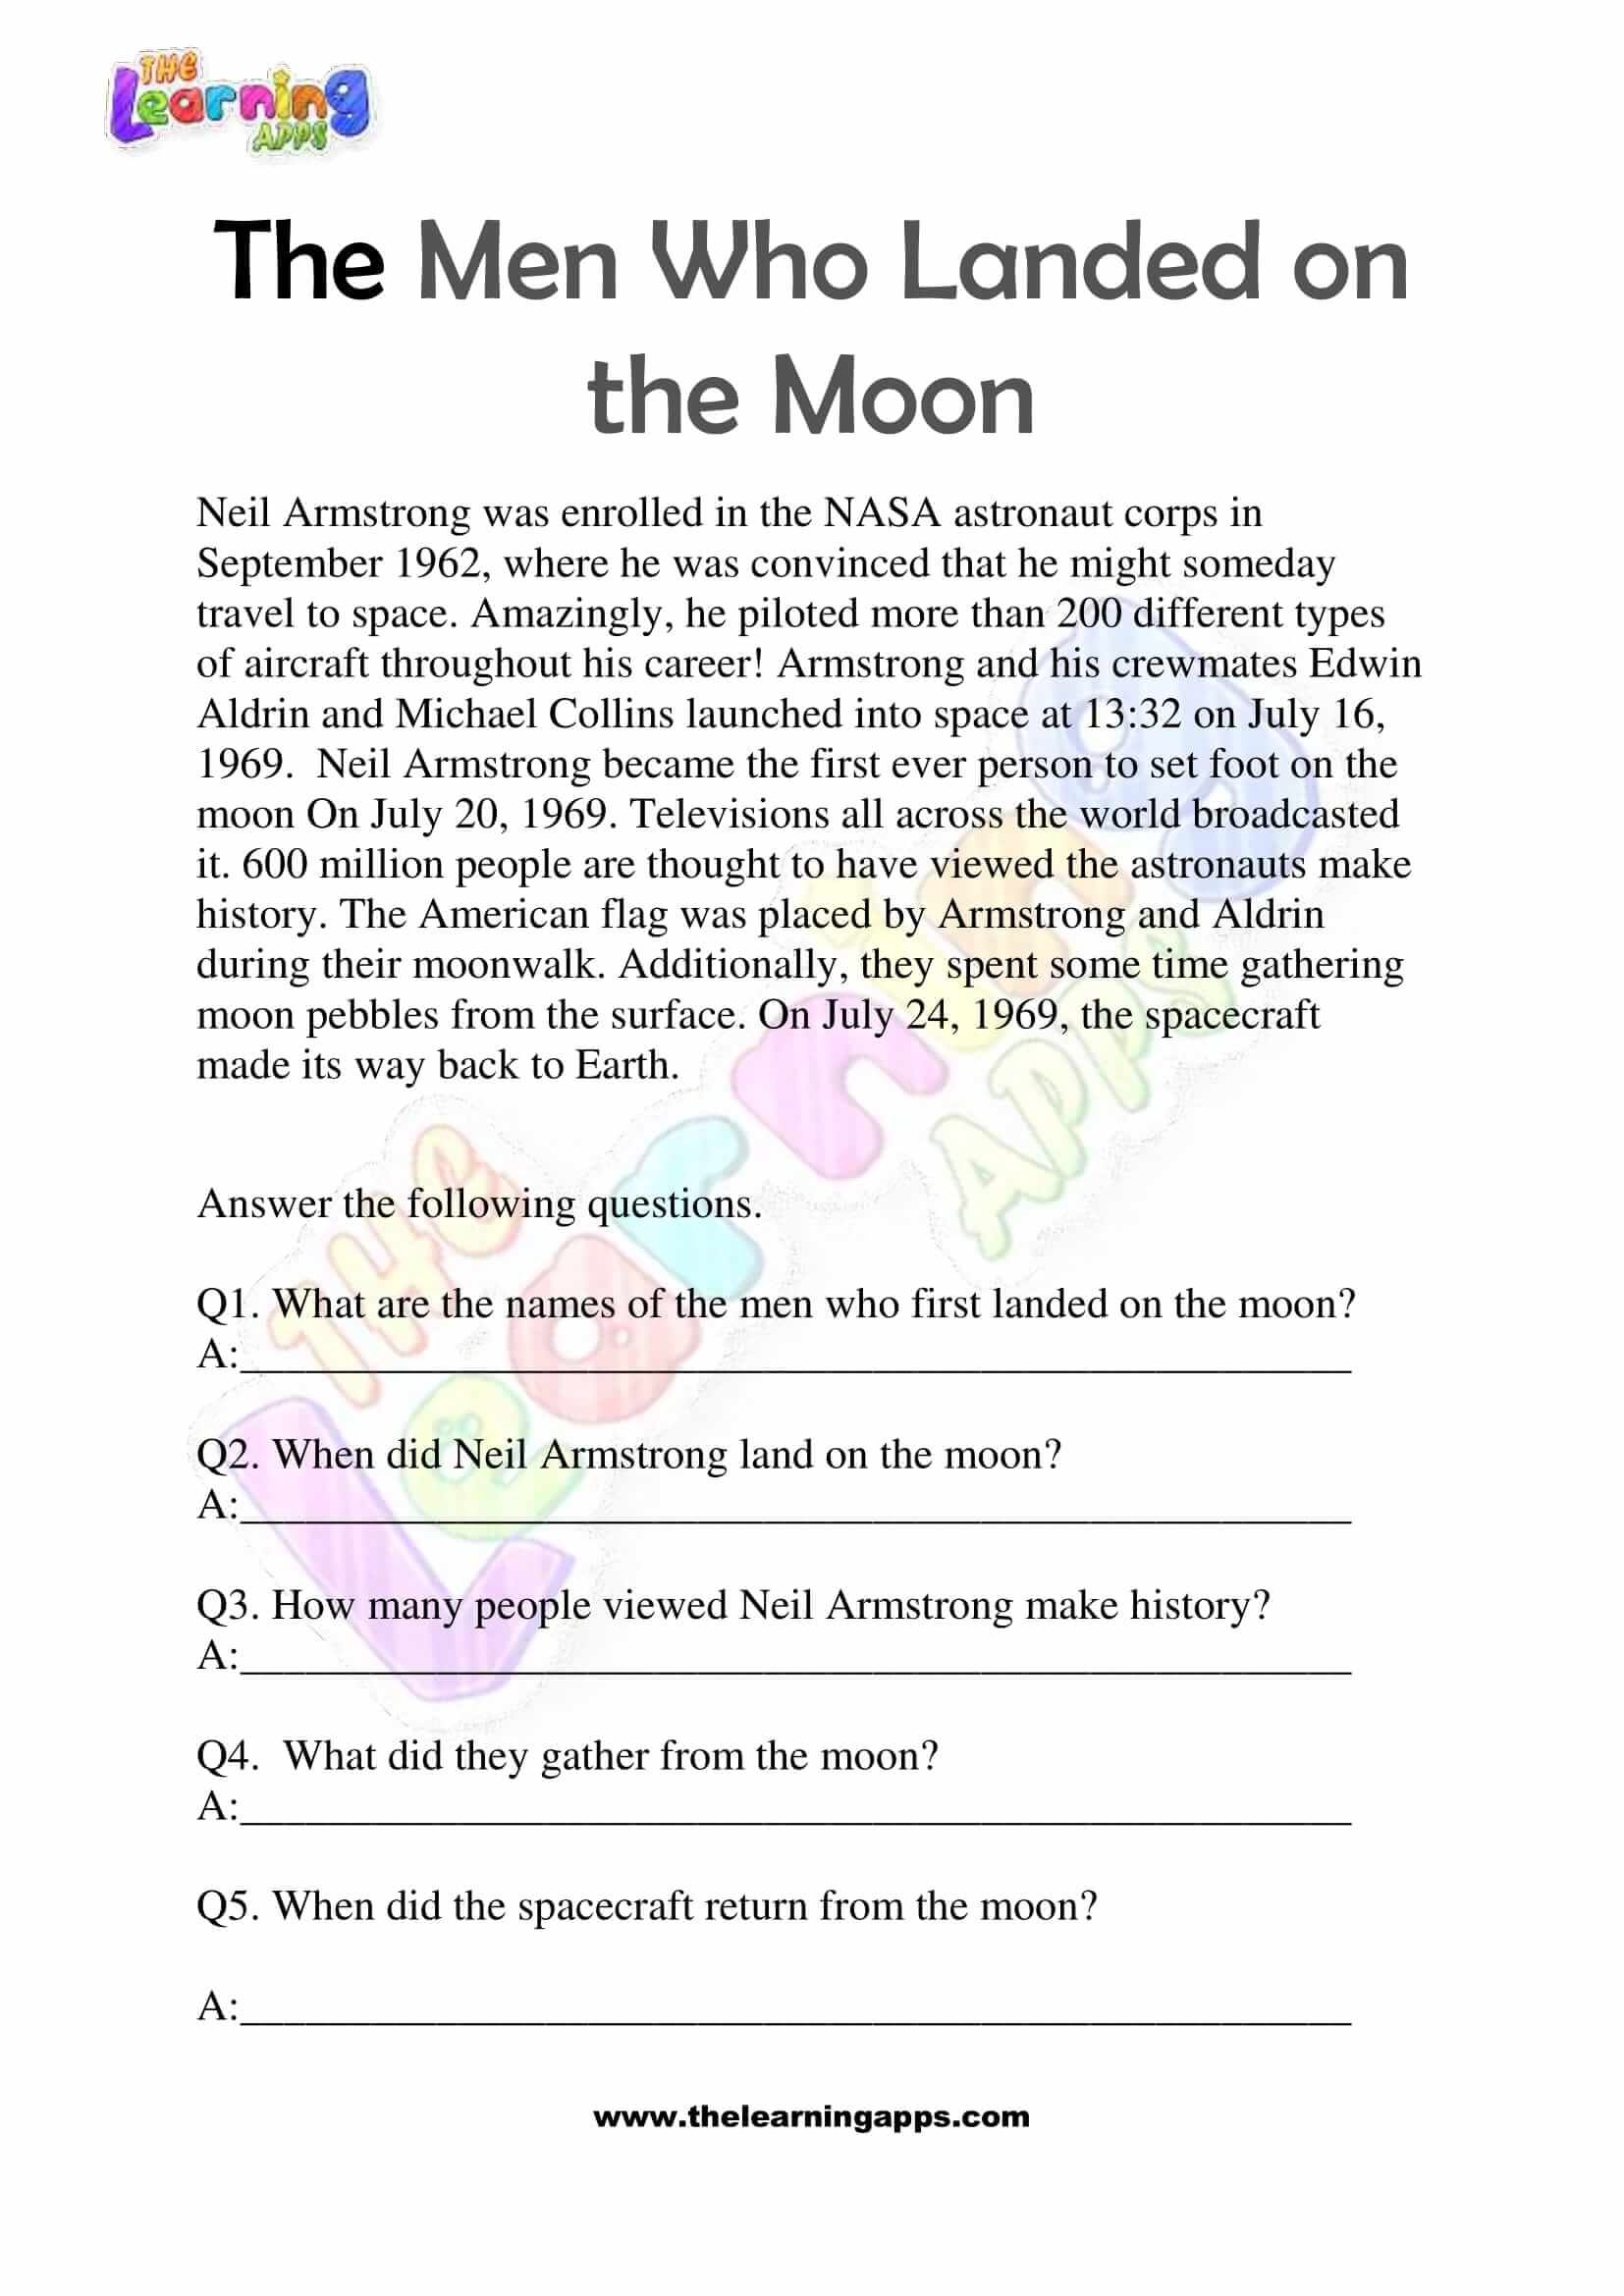 Non Fiction Reading Passages - Grade 2 - The Man who landed on the Moon